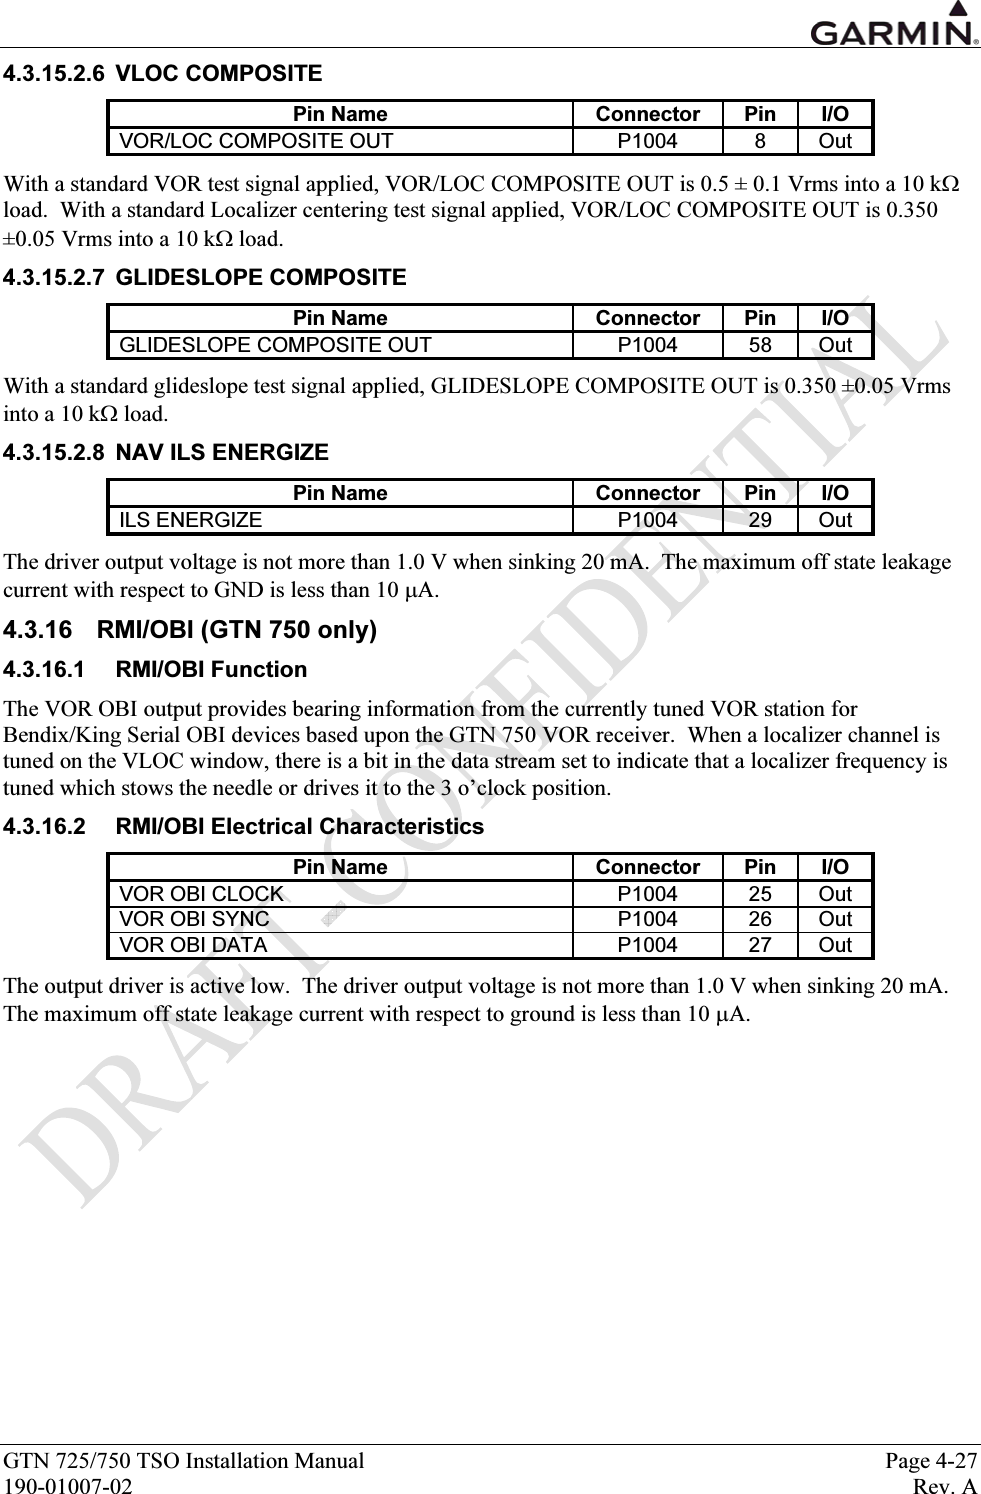  GTN 725/750 TSO Installation Manual  Page 4-27 190-01007-02  Rev. A 4.3.15.2.6 VLOC COMPOSITE Pin Name  Connector  Pin  I/O VOR/LOC COMPOSITE OUT  P1004  8  Out With a standard VOR test signal applied, VOR/LOC COMPOSITE OUT is 0.5 ± 0.1 Vrms into a 10 kΩ load.  With a standard Localizer centering test signal applied, VOR/LOC COMPOSITE OUT is 0.350 ±0.05 Vrms into a 10 kΩ load. 4.3.15.2.7 GLIDESLOPE COMPOSITE Pin Name  Connector  Pin  I/O GLIDESLOPE COMPOSITE OUT  P1004  58  Out With a standard glideslope test signal applied, GLIDESLOPE COMPOSITE OUT is 0.350 ±0.05 Vrms into a 10 kΩ load. 4.3.15.2.8  NAV ILS ENERGIZE Pin Name  Connector  Pin  I/O ILS ENERGIZE  P1004  29  Out The driver output voltage is not more than 1.0 V when sinking 20 mA.  The maximum off state leakage current with respect to GND is less than 10 μA. 4.3.16  RMI/OBI (GTN 750 only) 4.3.16.1 RMI/OBI Function The VOR OBI output provides bearing information from the currently tuned VOR station for Bendix/King Serial OBI devices based upon the GTN 750 VOR receiver.  When a localizer channel is tuned on the VLOC window, there is a bit in the data stream set to indicate that a localizer frequency is tuned which stows the needle or drives it to the 3 o’clock position. 4.3.16.2  RMI/OBI Electrical Characteristics Pin Name  Connector  Pin  I/O VOR OBI CLOCK  P1004  25  Out VOR OBI SYNC  P1004  26  Out VOR OBI DATA  P1004  27  Out The output driver is active low.  The driver output voltage is not more than 1.0 V when sinking 20 mA.  The maximum off state leakage current with respect to ground is less than 10 μA. 